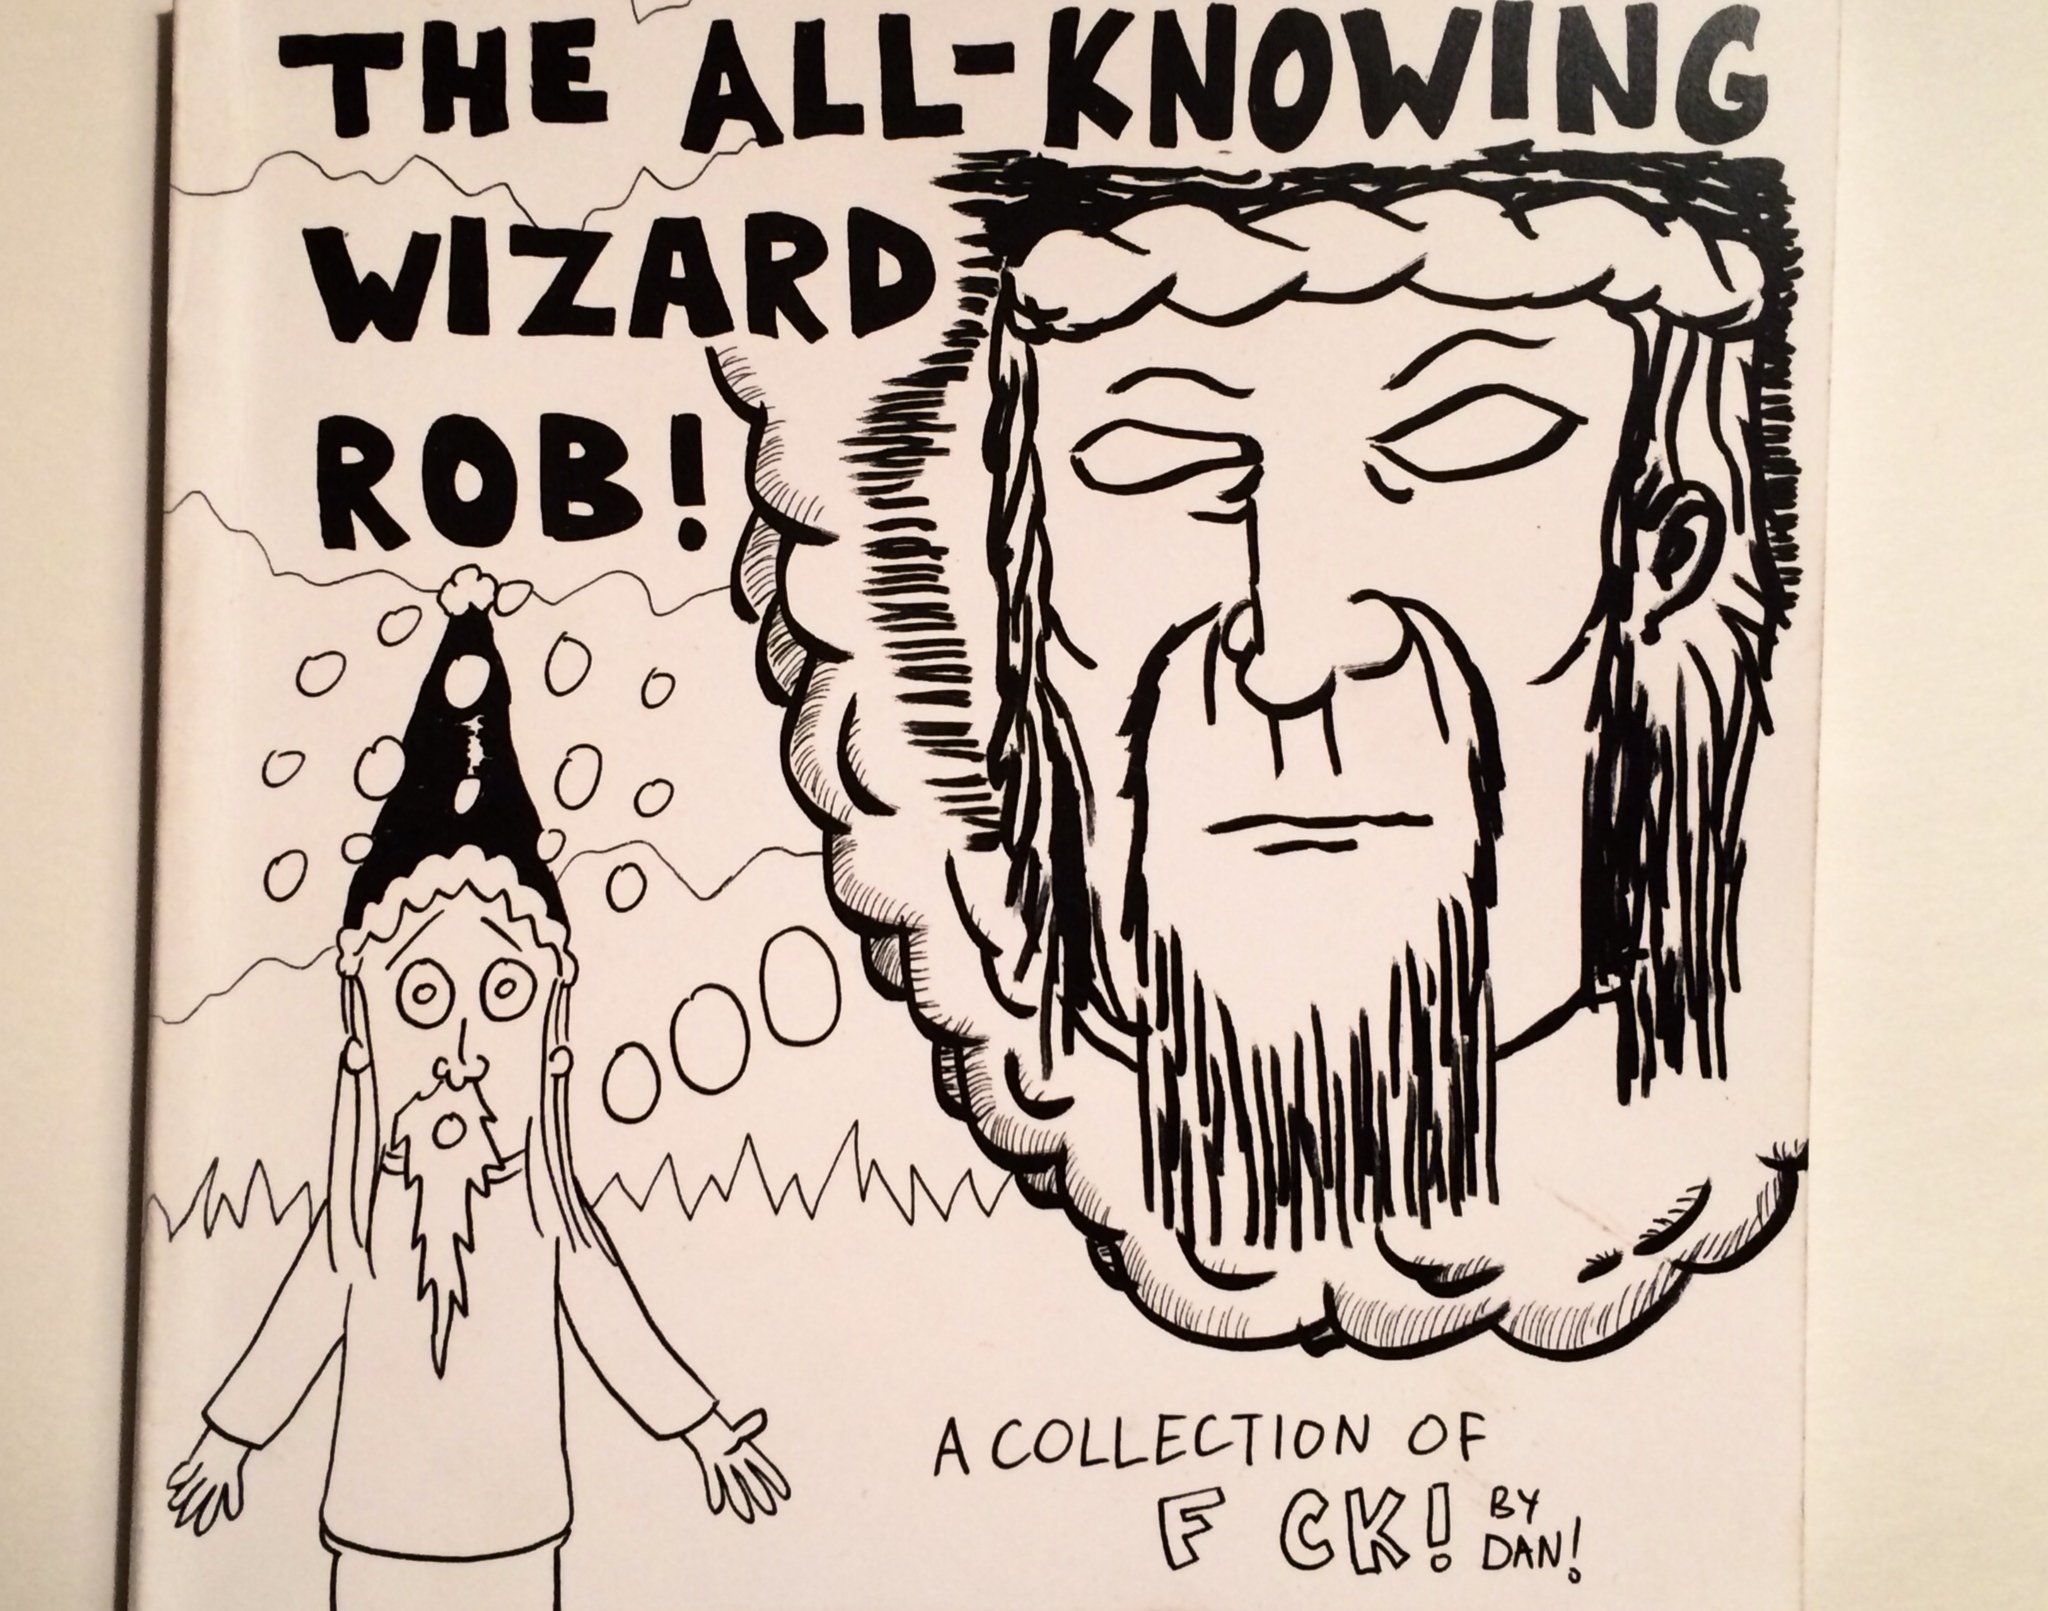 The All-Knowing Wizard Rob